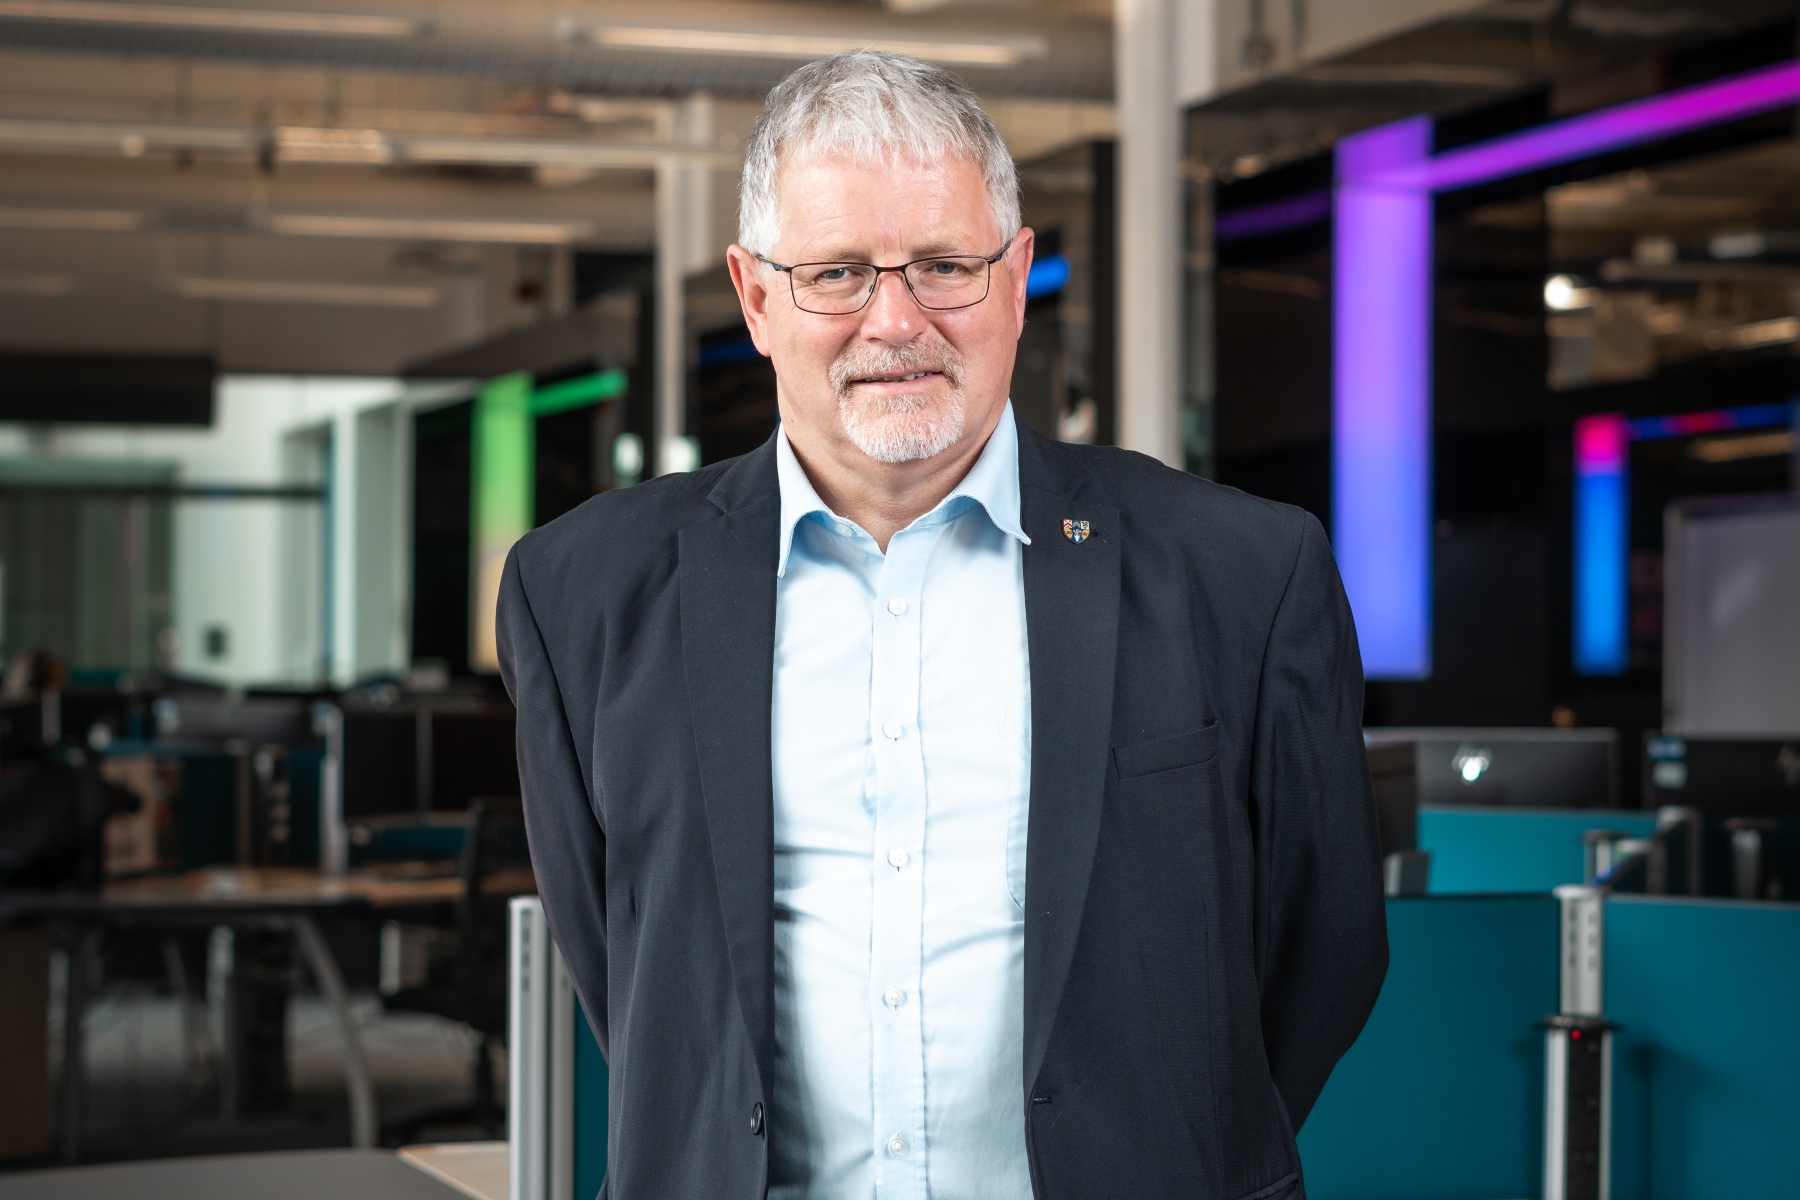 Professor Alastair Irons has been re-elected Vice President of the BCS, The Chartered Institute for IT